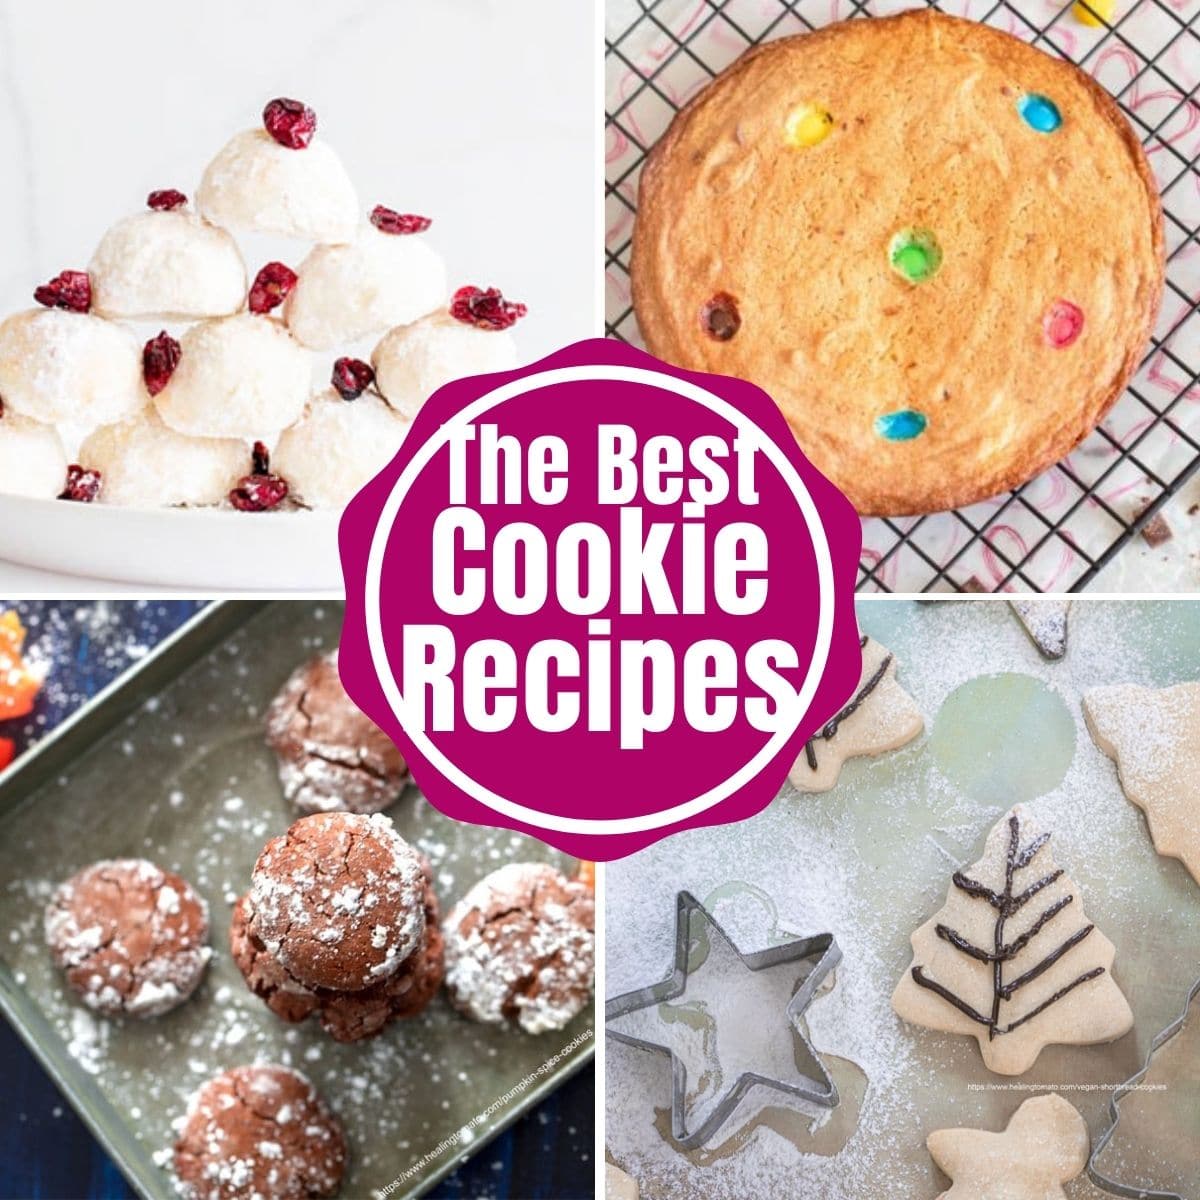 A collage of 4 vegan cookies recipe images with the words "The Best Vegan Cookies" written on it